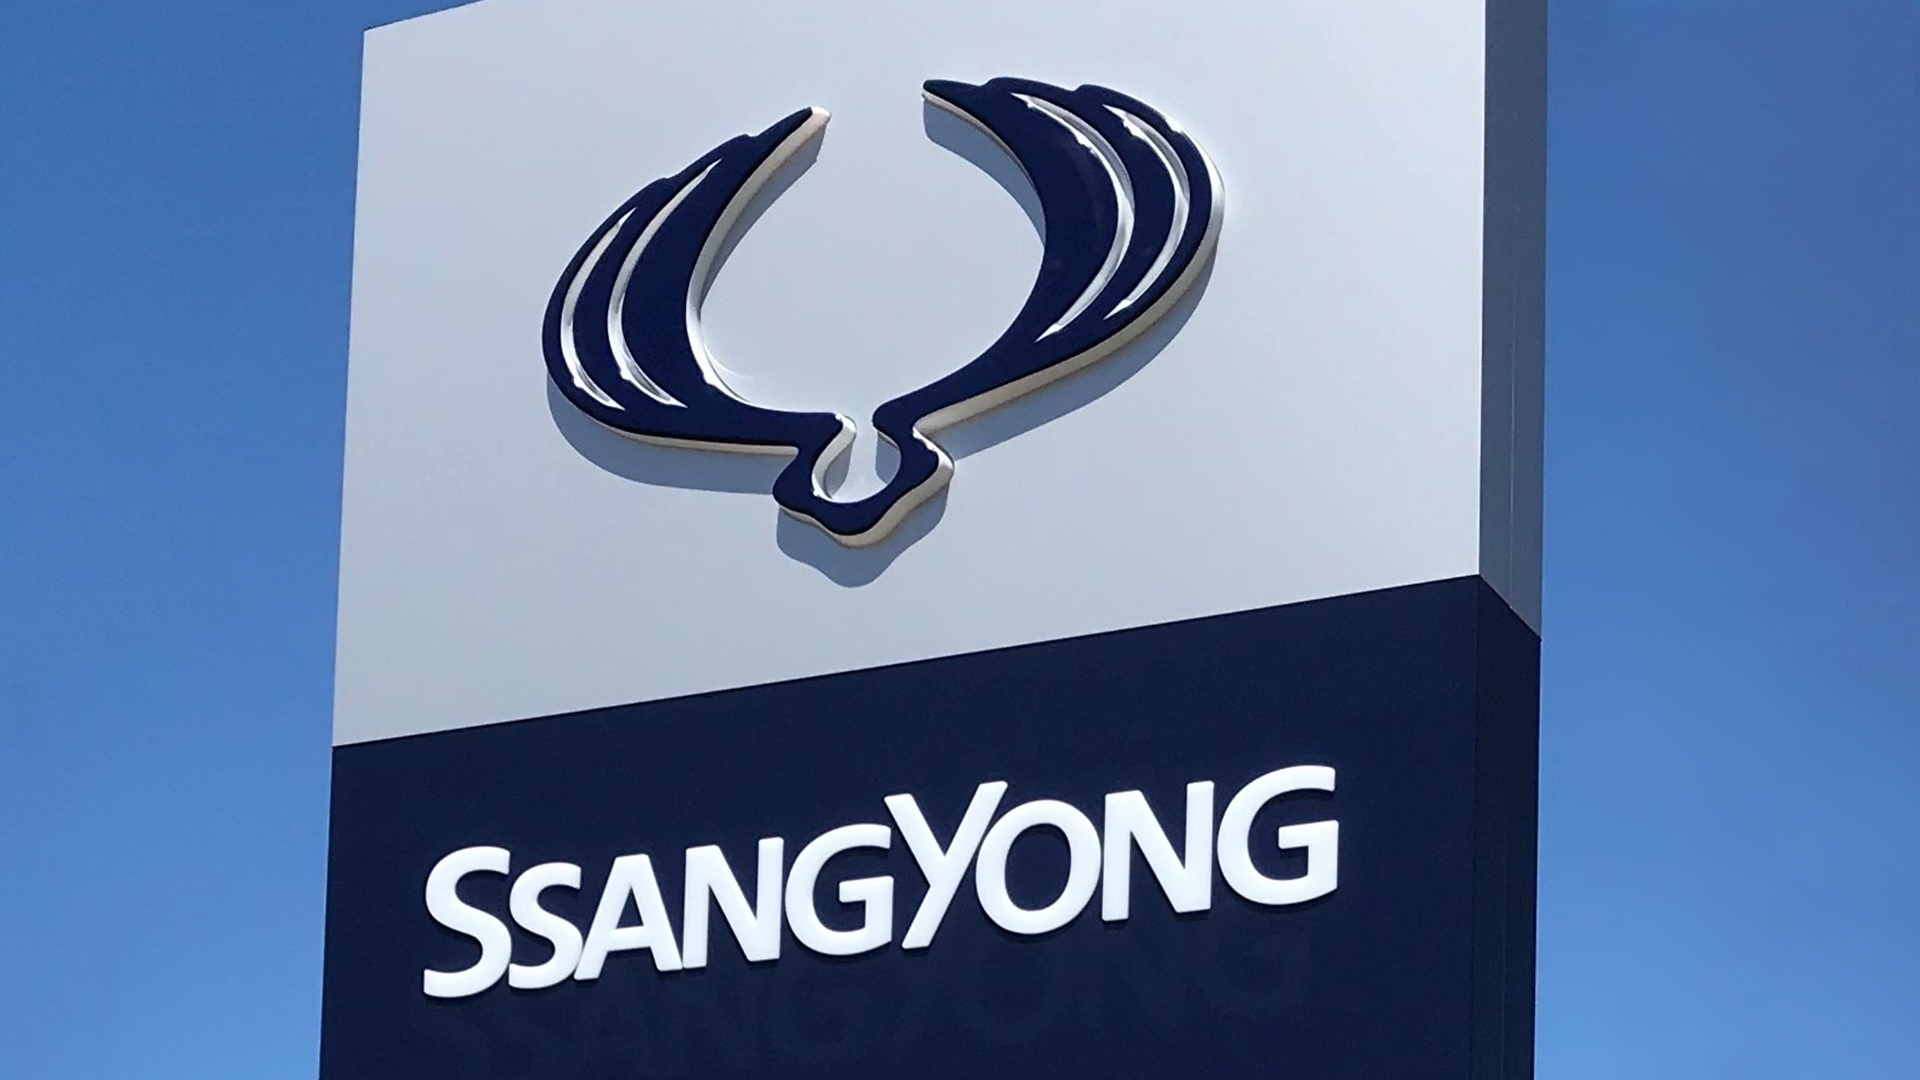 SsangYong signage edited